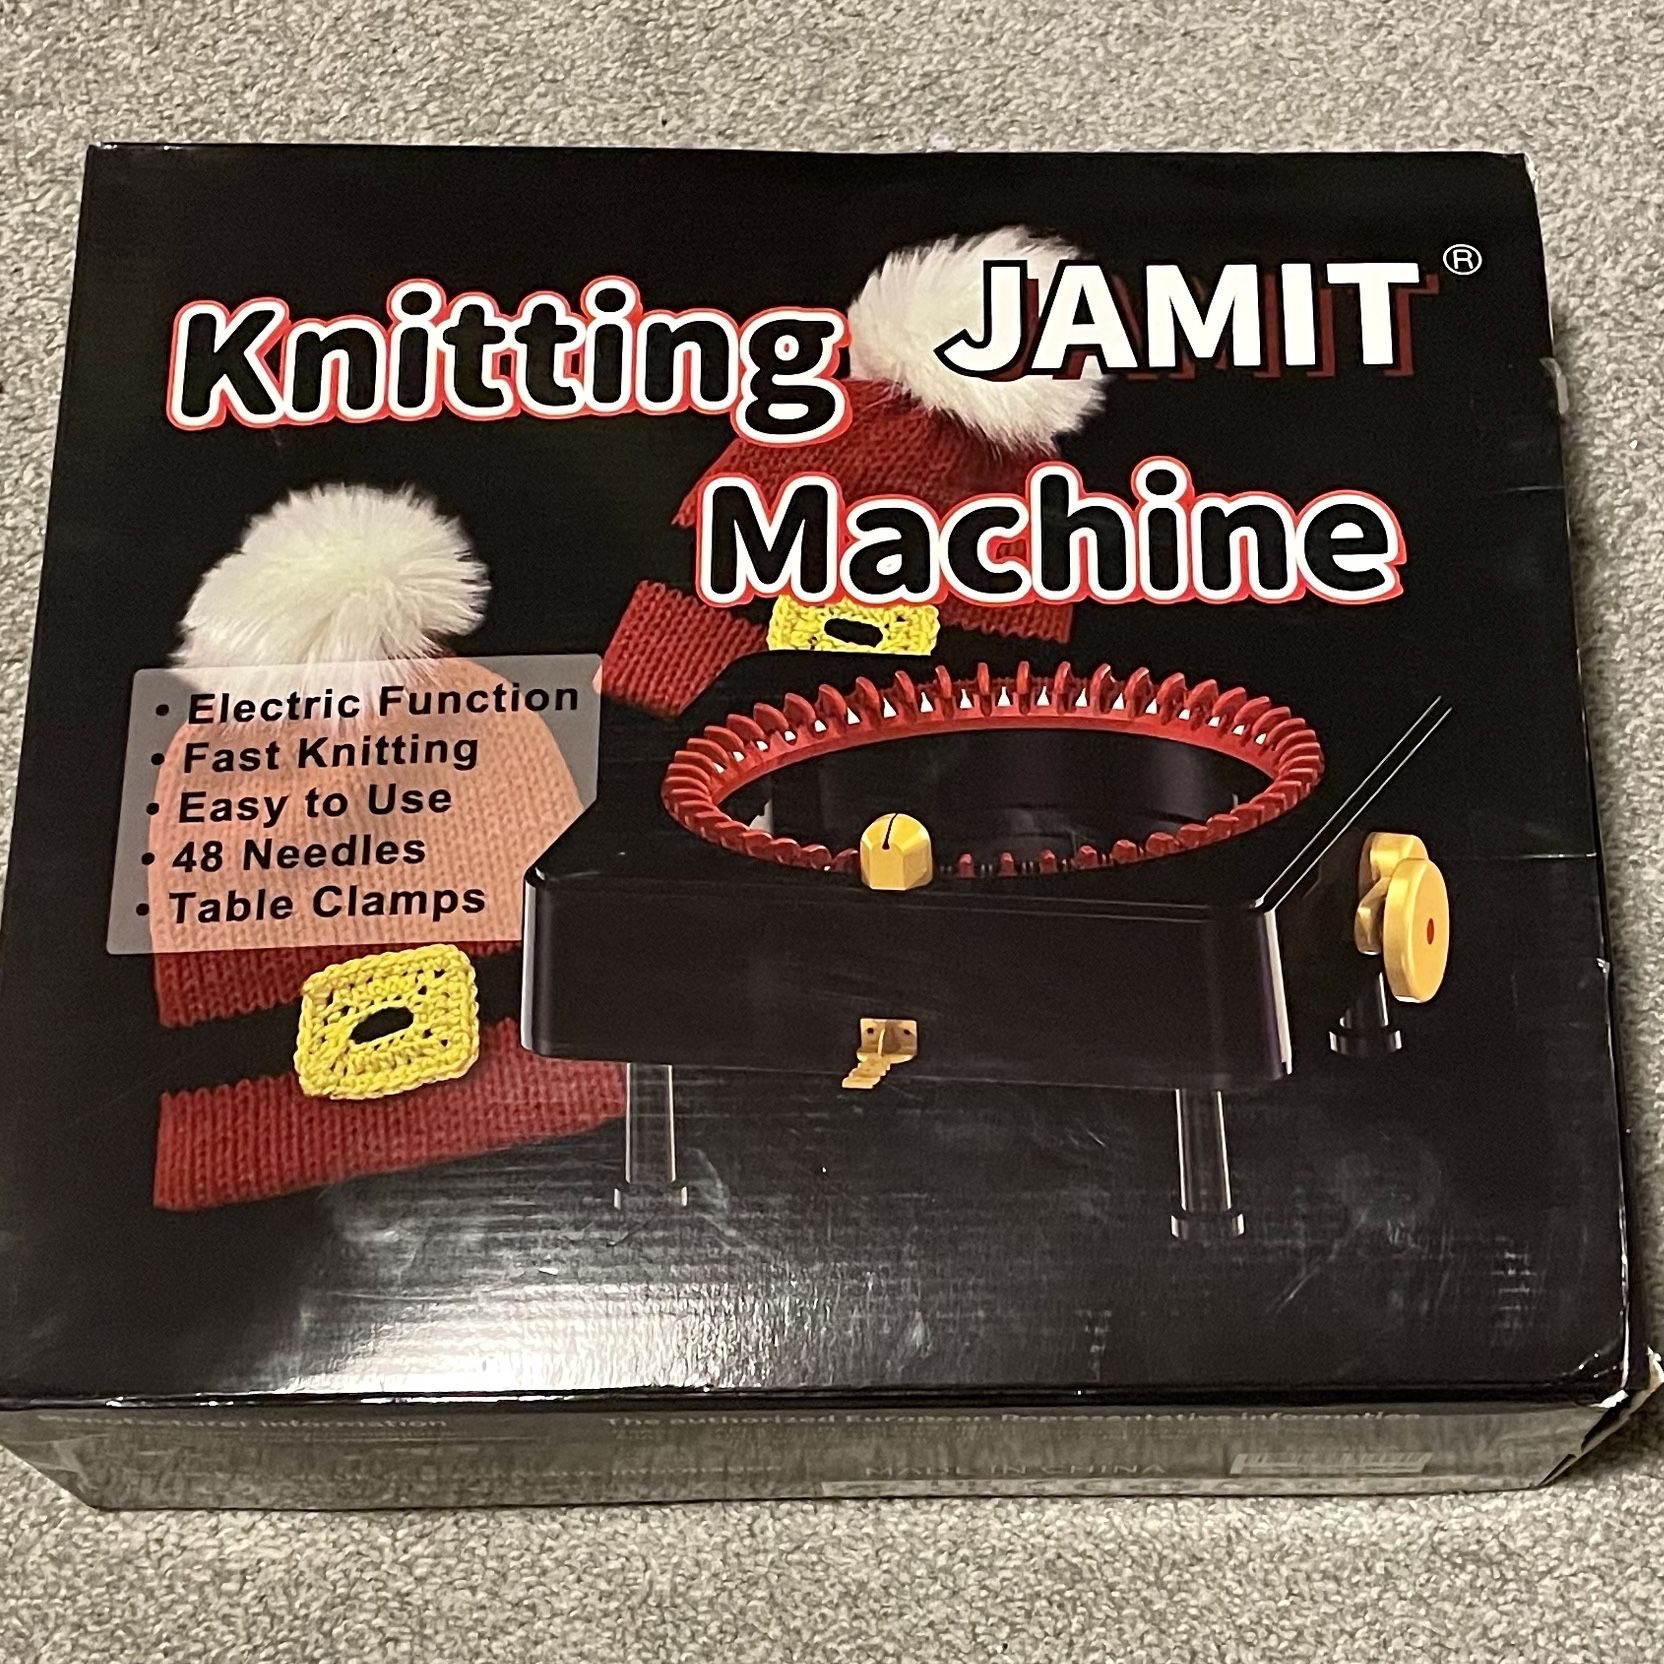 JAMIT Electric Knitting Machine for Sale in Parma, OH - OfferUp